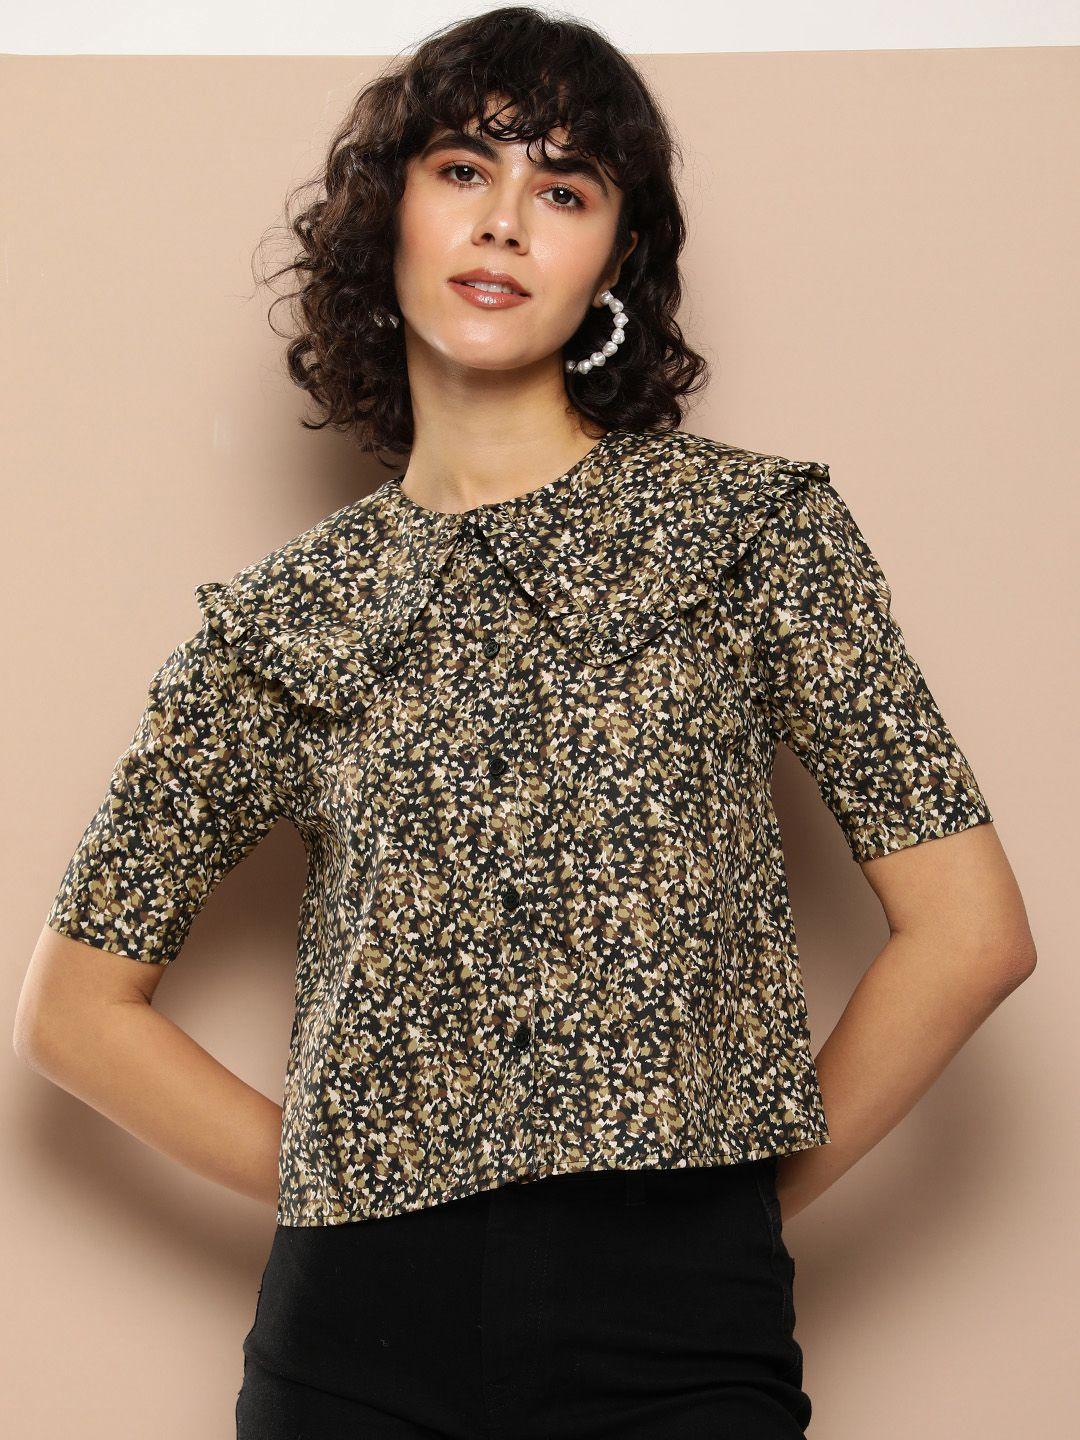 encore-by-invictus-floral-printed-casual-shirt